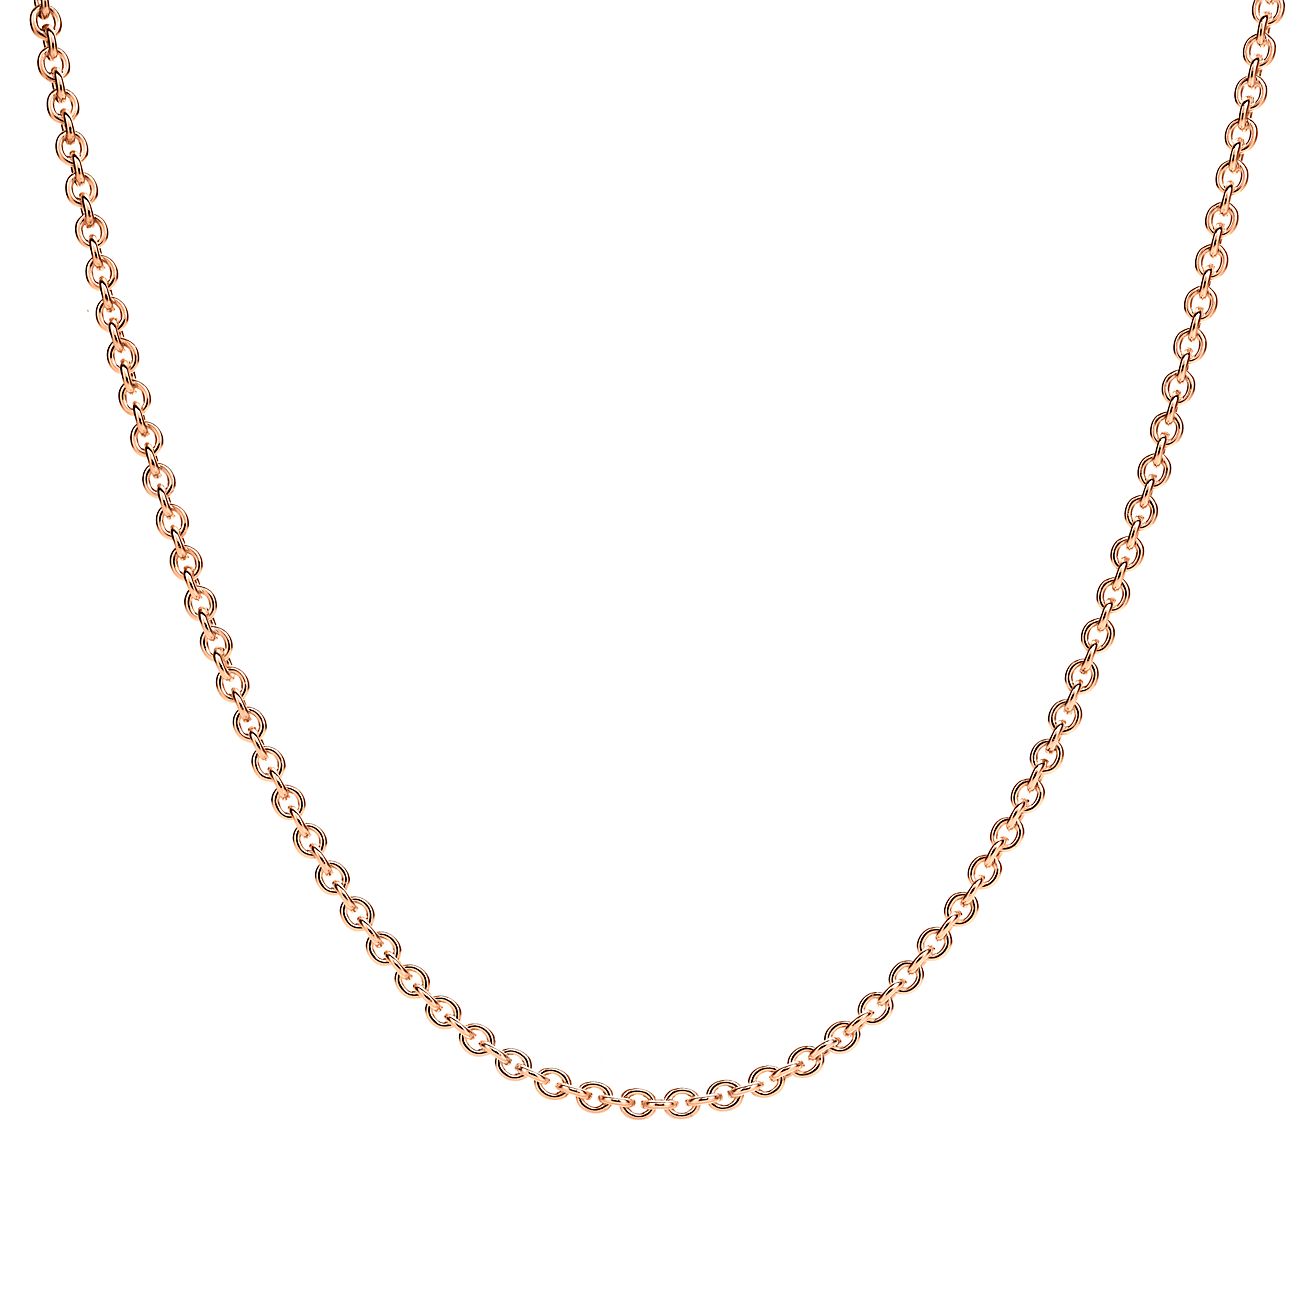 Chain in 18k rose gold, 18